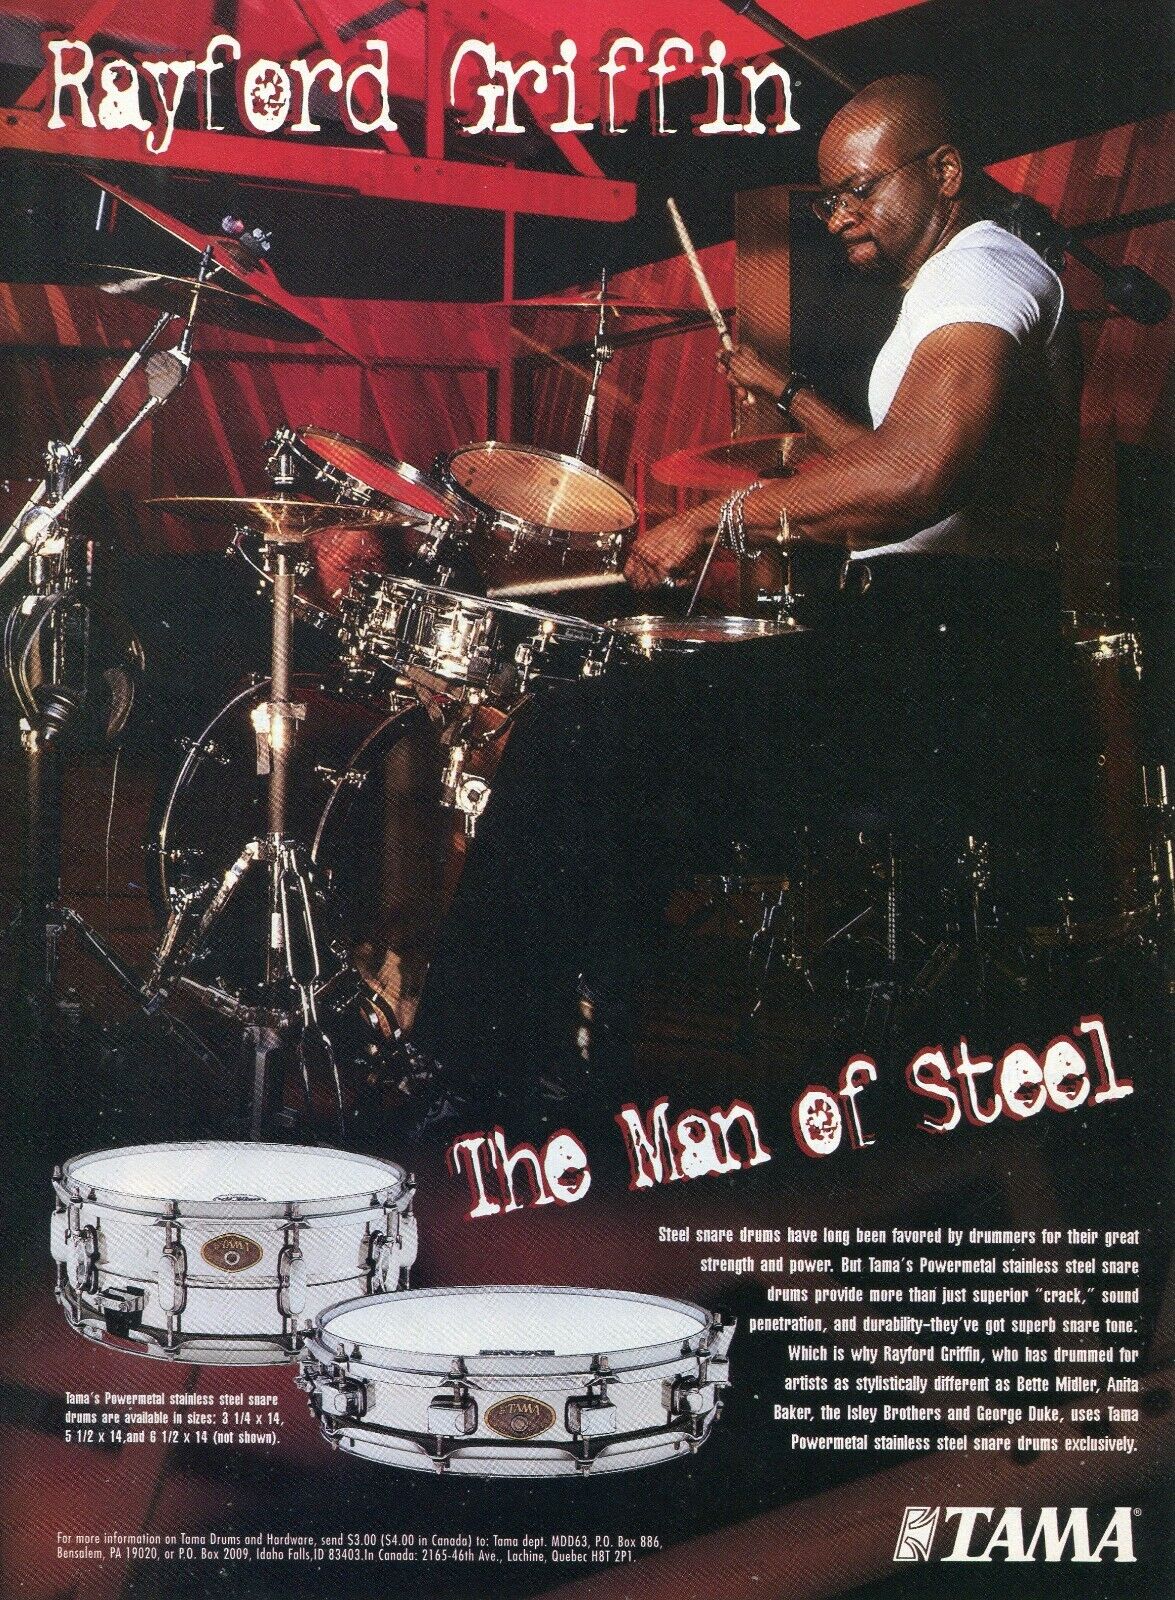 1997 Print Ad of Tama Powermetal Steel Snare Drums w Rayford Griffin